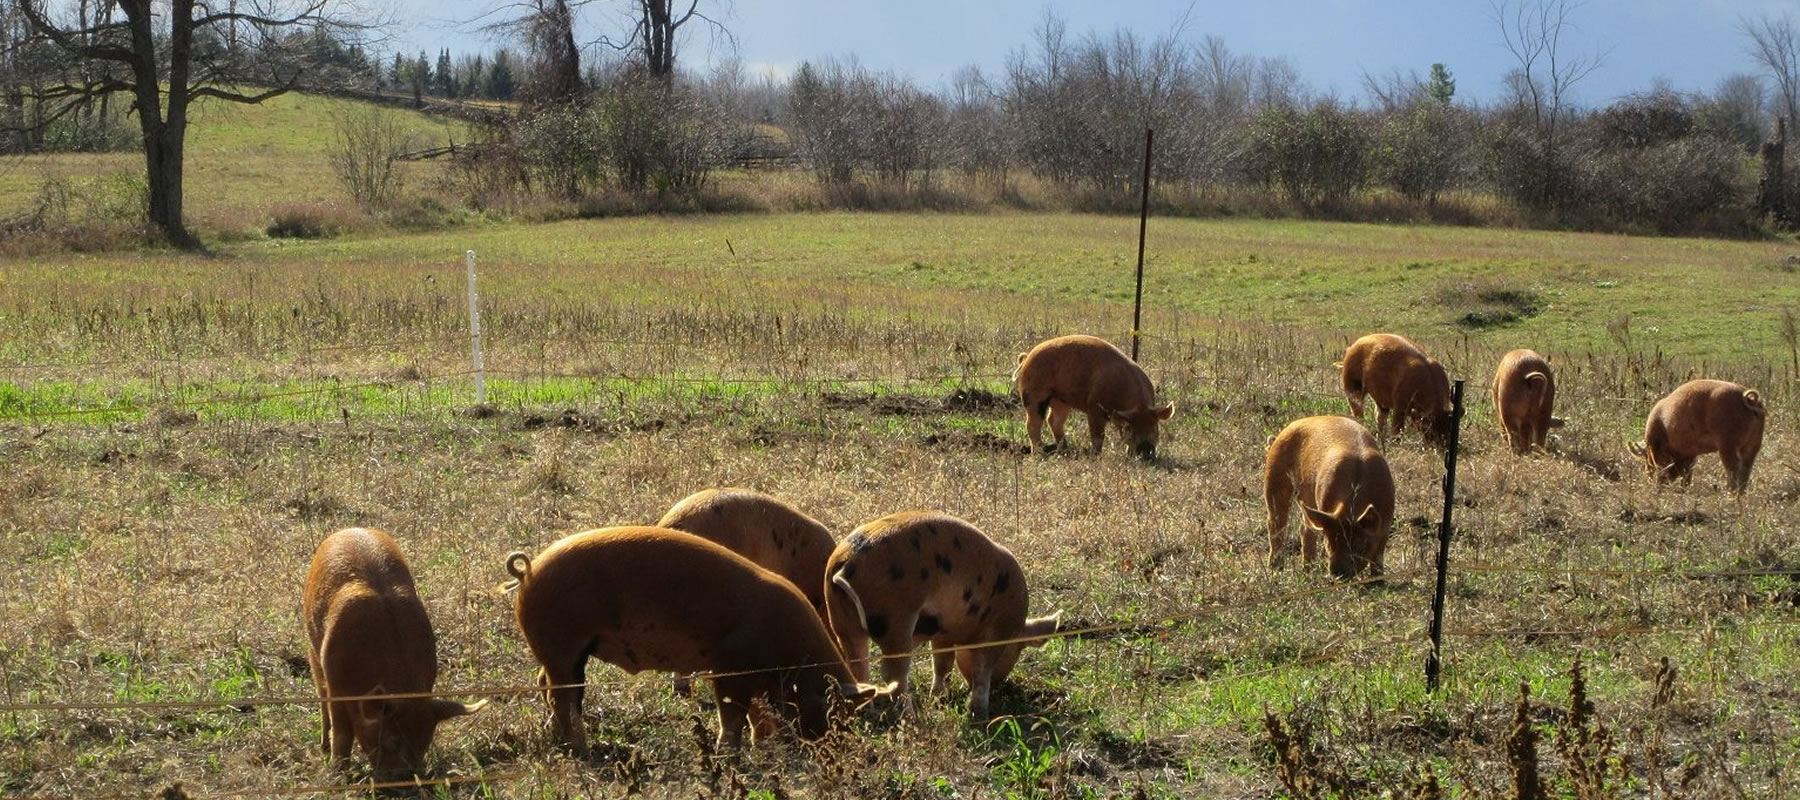 pigs grazing at the farm